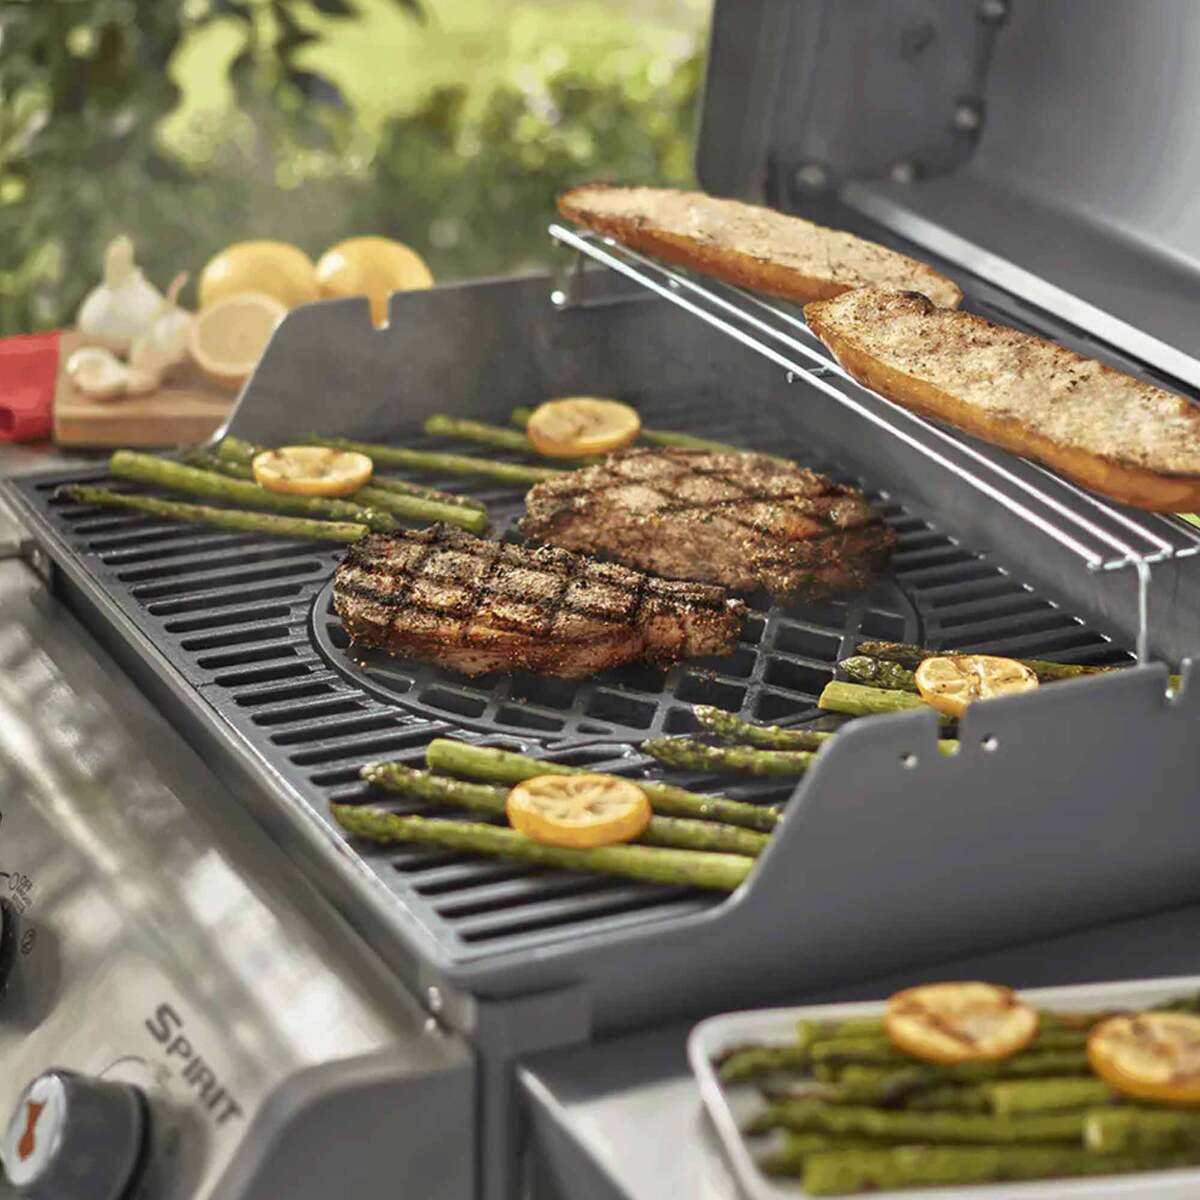 Weber Sear Grate 8834 Built for Gourmet BBQ System Cooking Grates